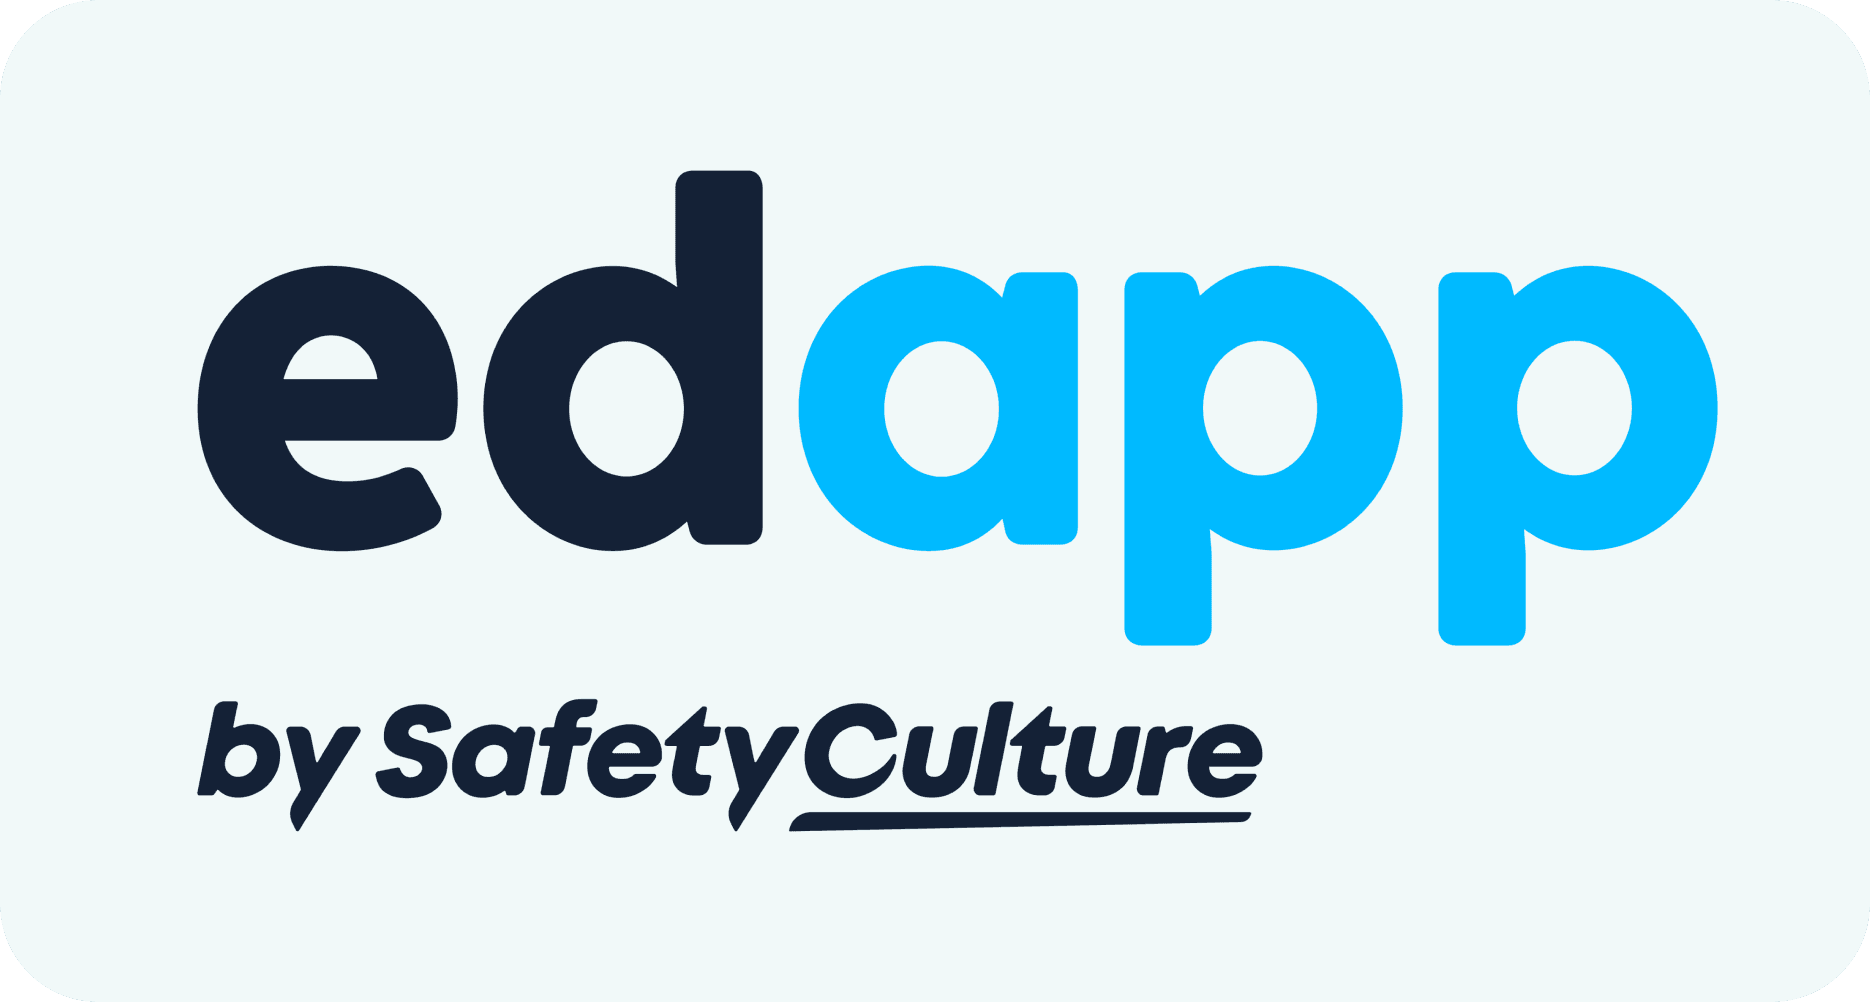 EdApp Logo as an app that features adaptive learning